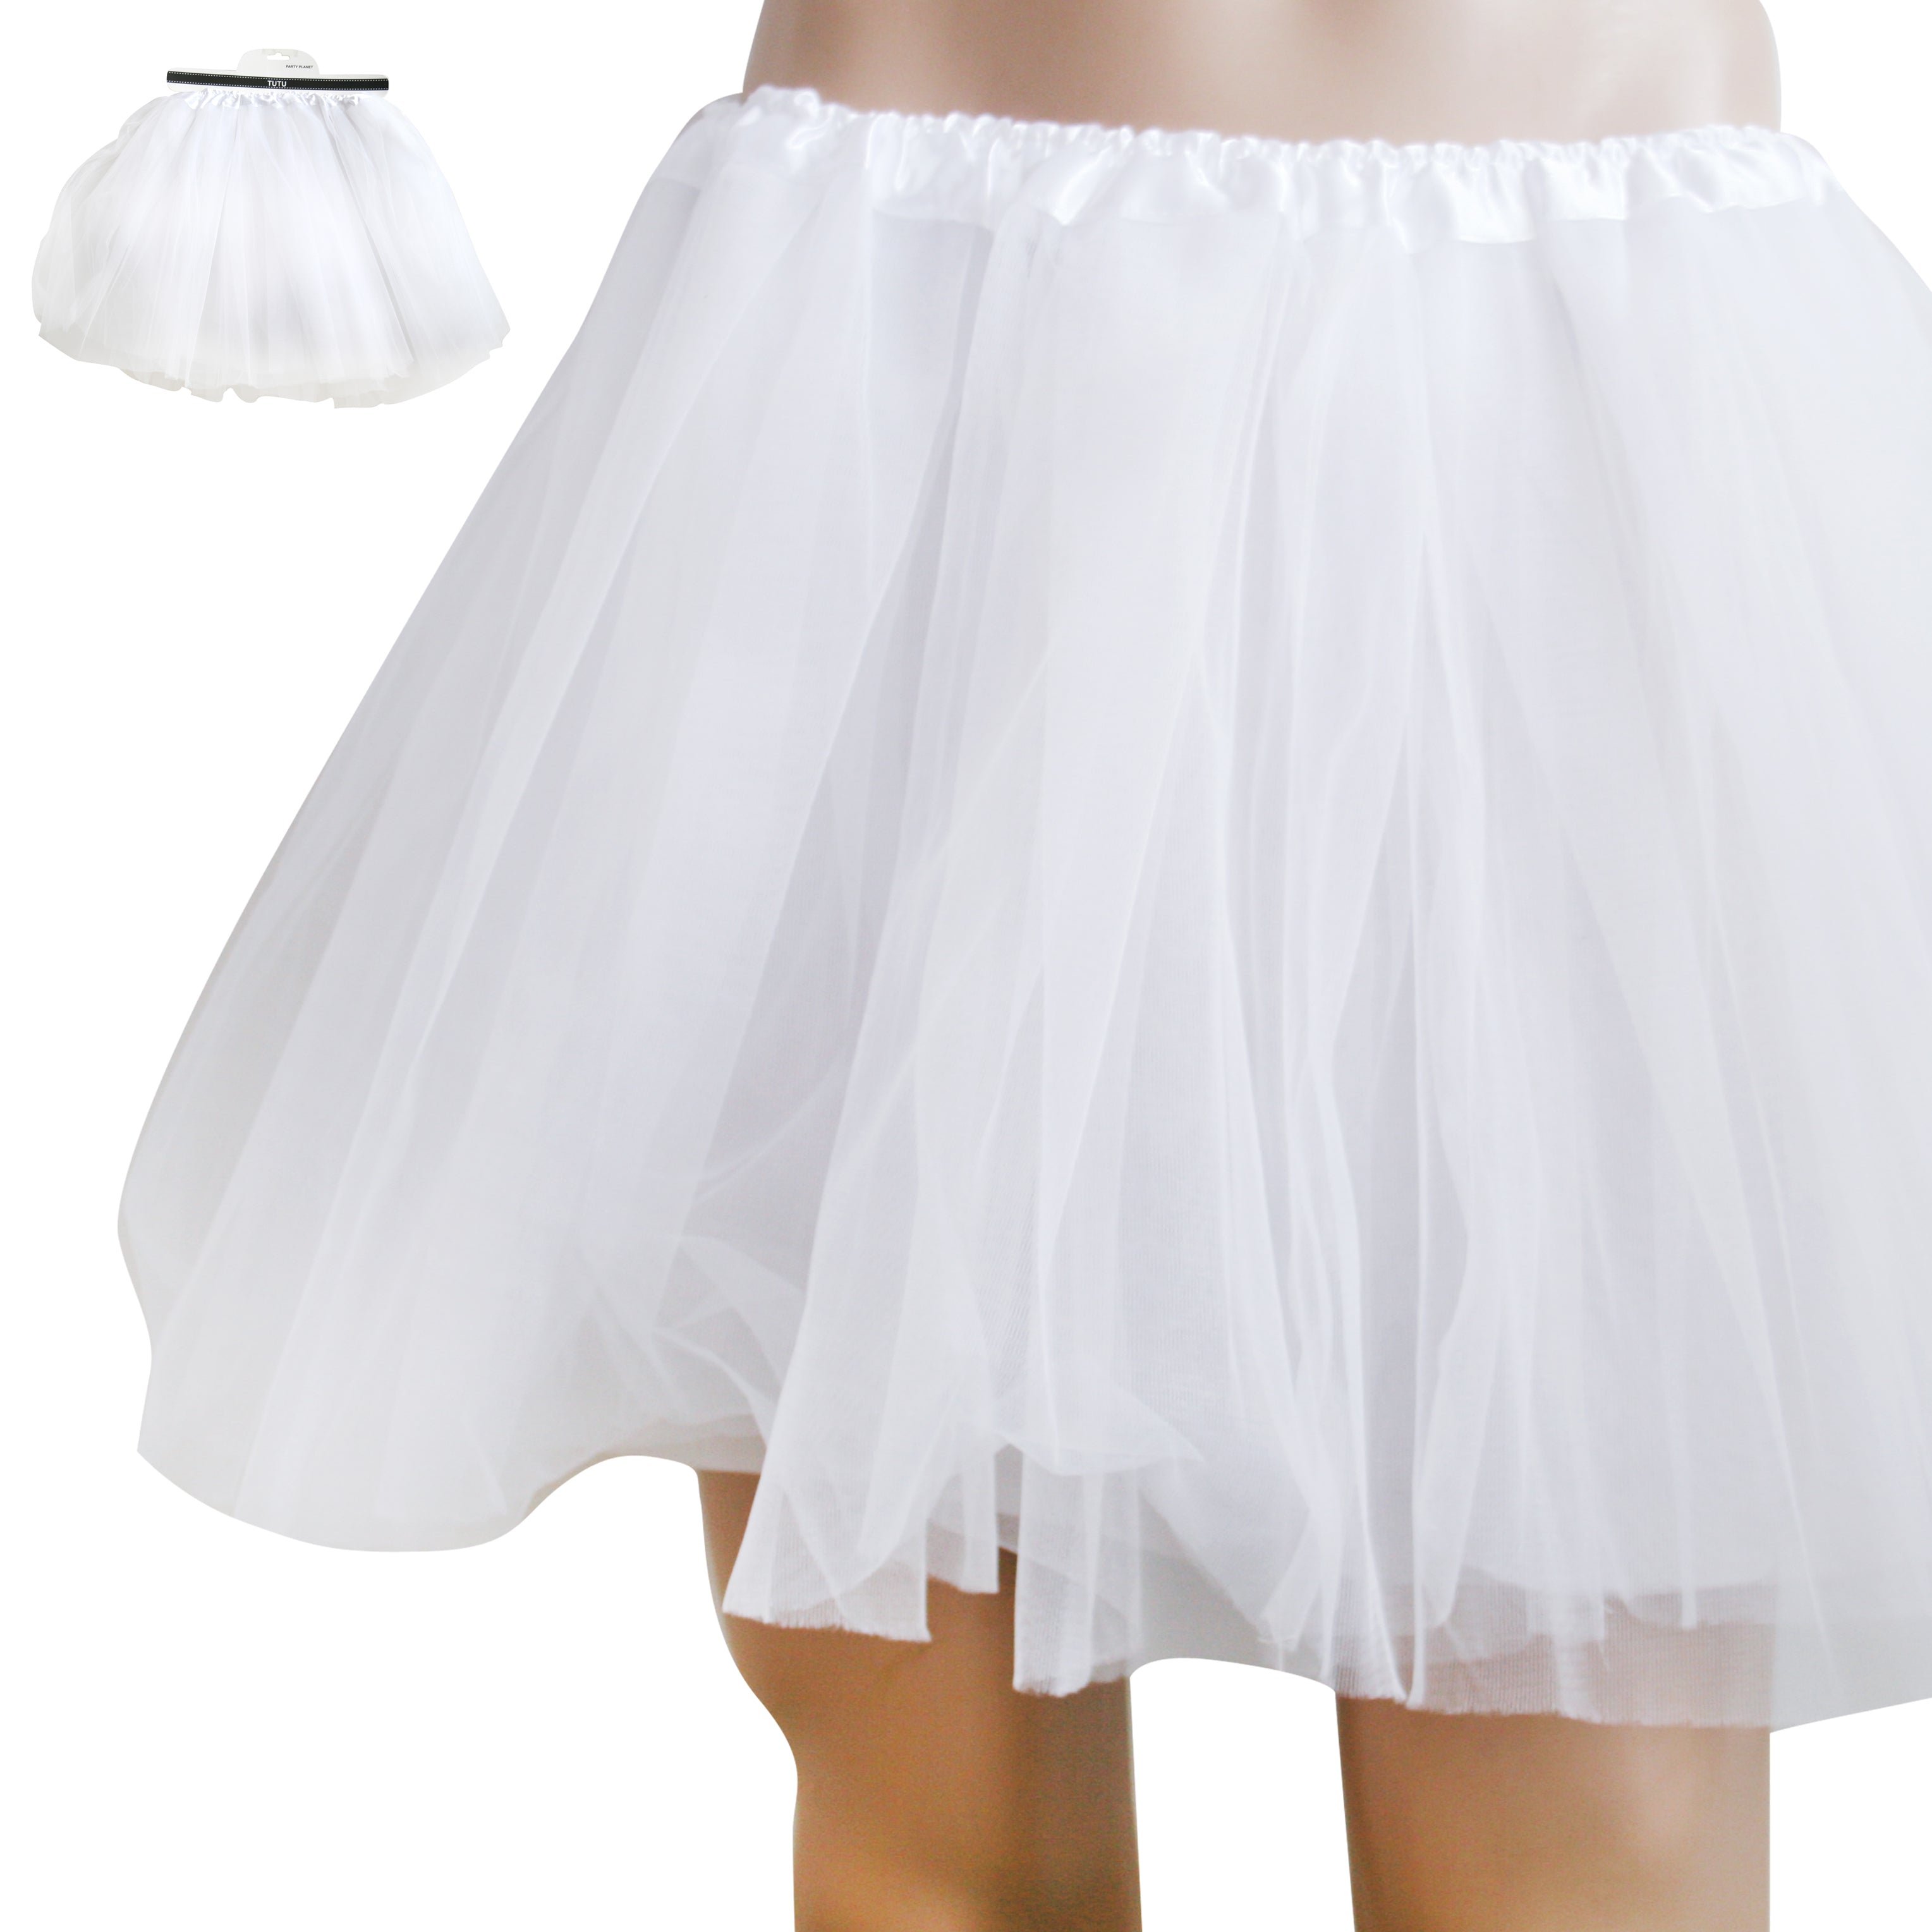 White Adult Tutu - One size fits most